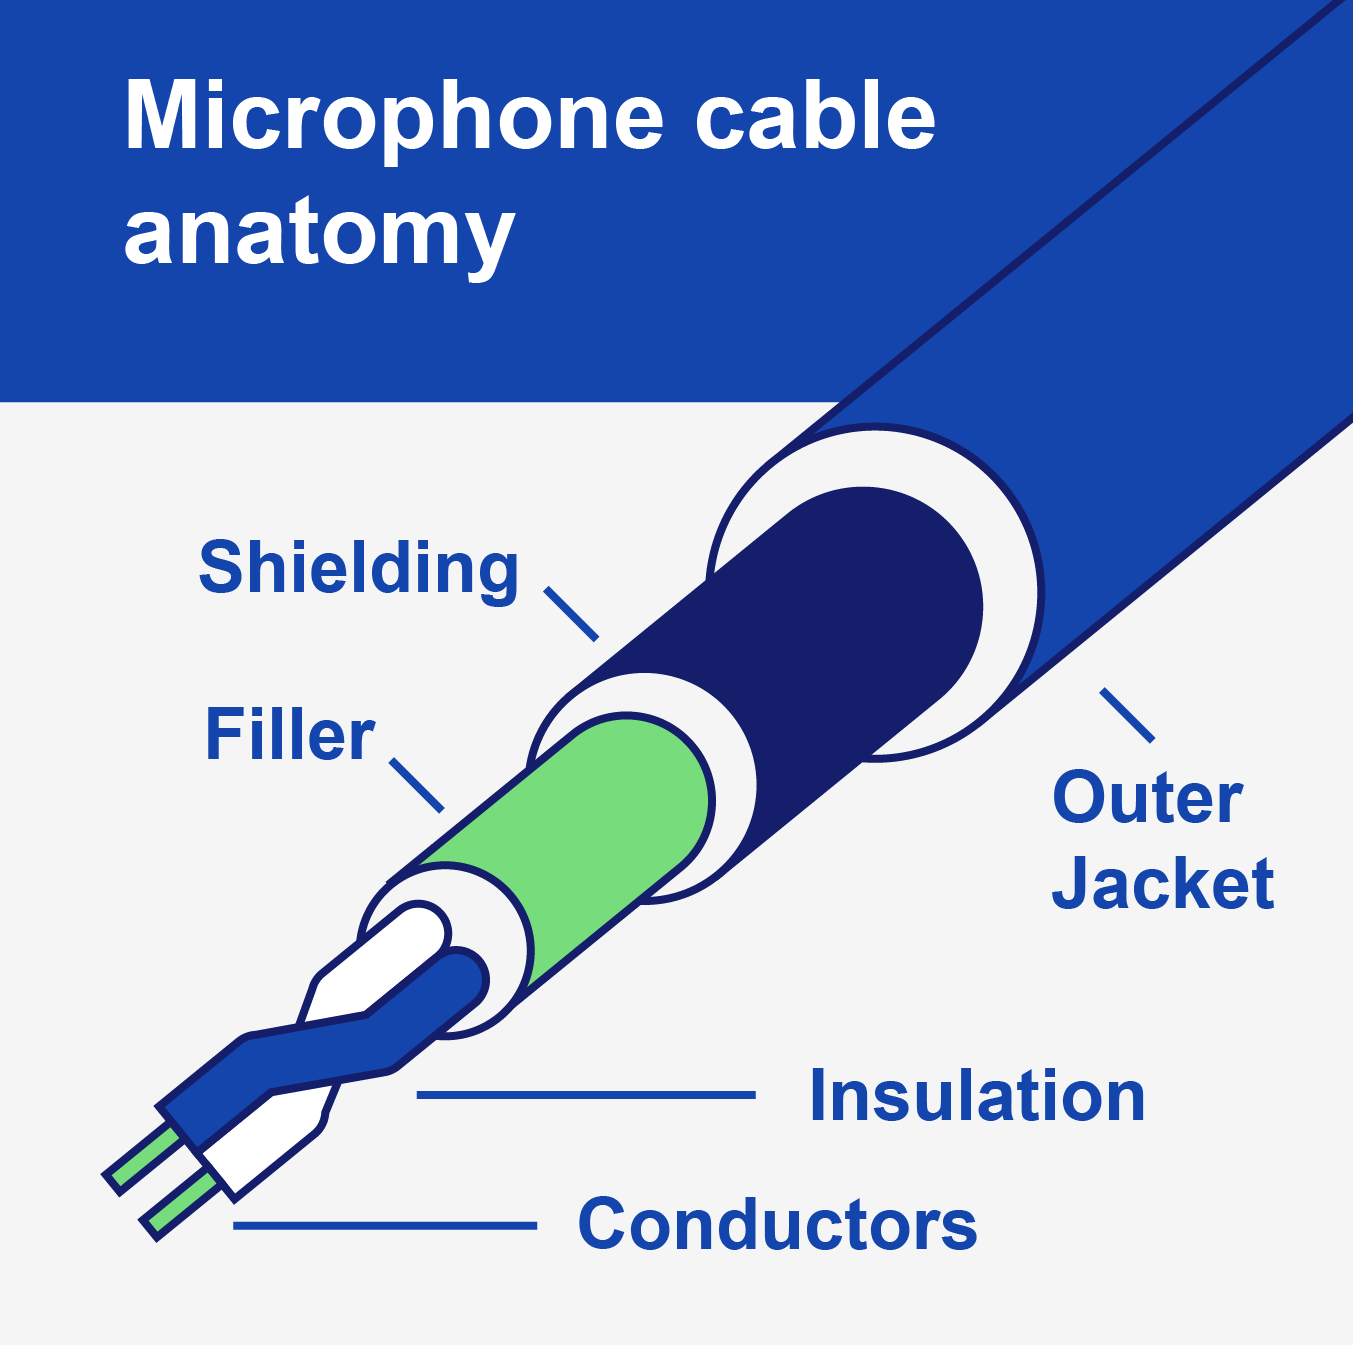 The anatomy of an XLR microphone and speaker cable.

Two conductors (copper wires) lie at the core of microphone cables. And manufacturers wrap both cables in individual strips of insulation. 

Then manufacturers twist both wires together and user filler to smooth the cable out. As a result, filler removes any warping that may occur and gives us a nice round cable.  

Next, shielding - which is usually copper too - protects the conductors from potential sources of interference like electrical gear.

Finally, manufacturers cover the cable with a rubber outer jacket that protects its internal components from physical damage.
